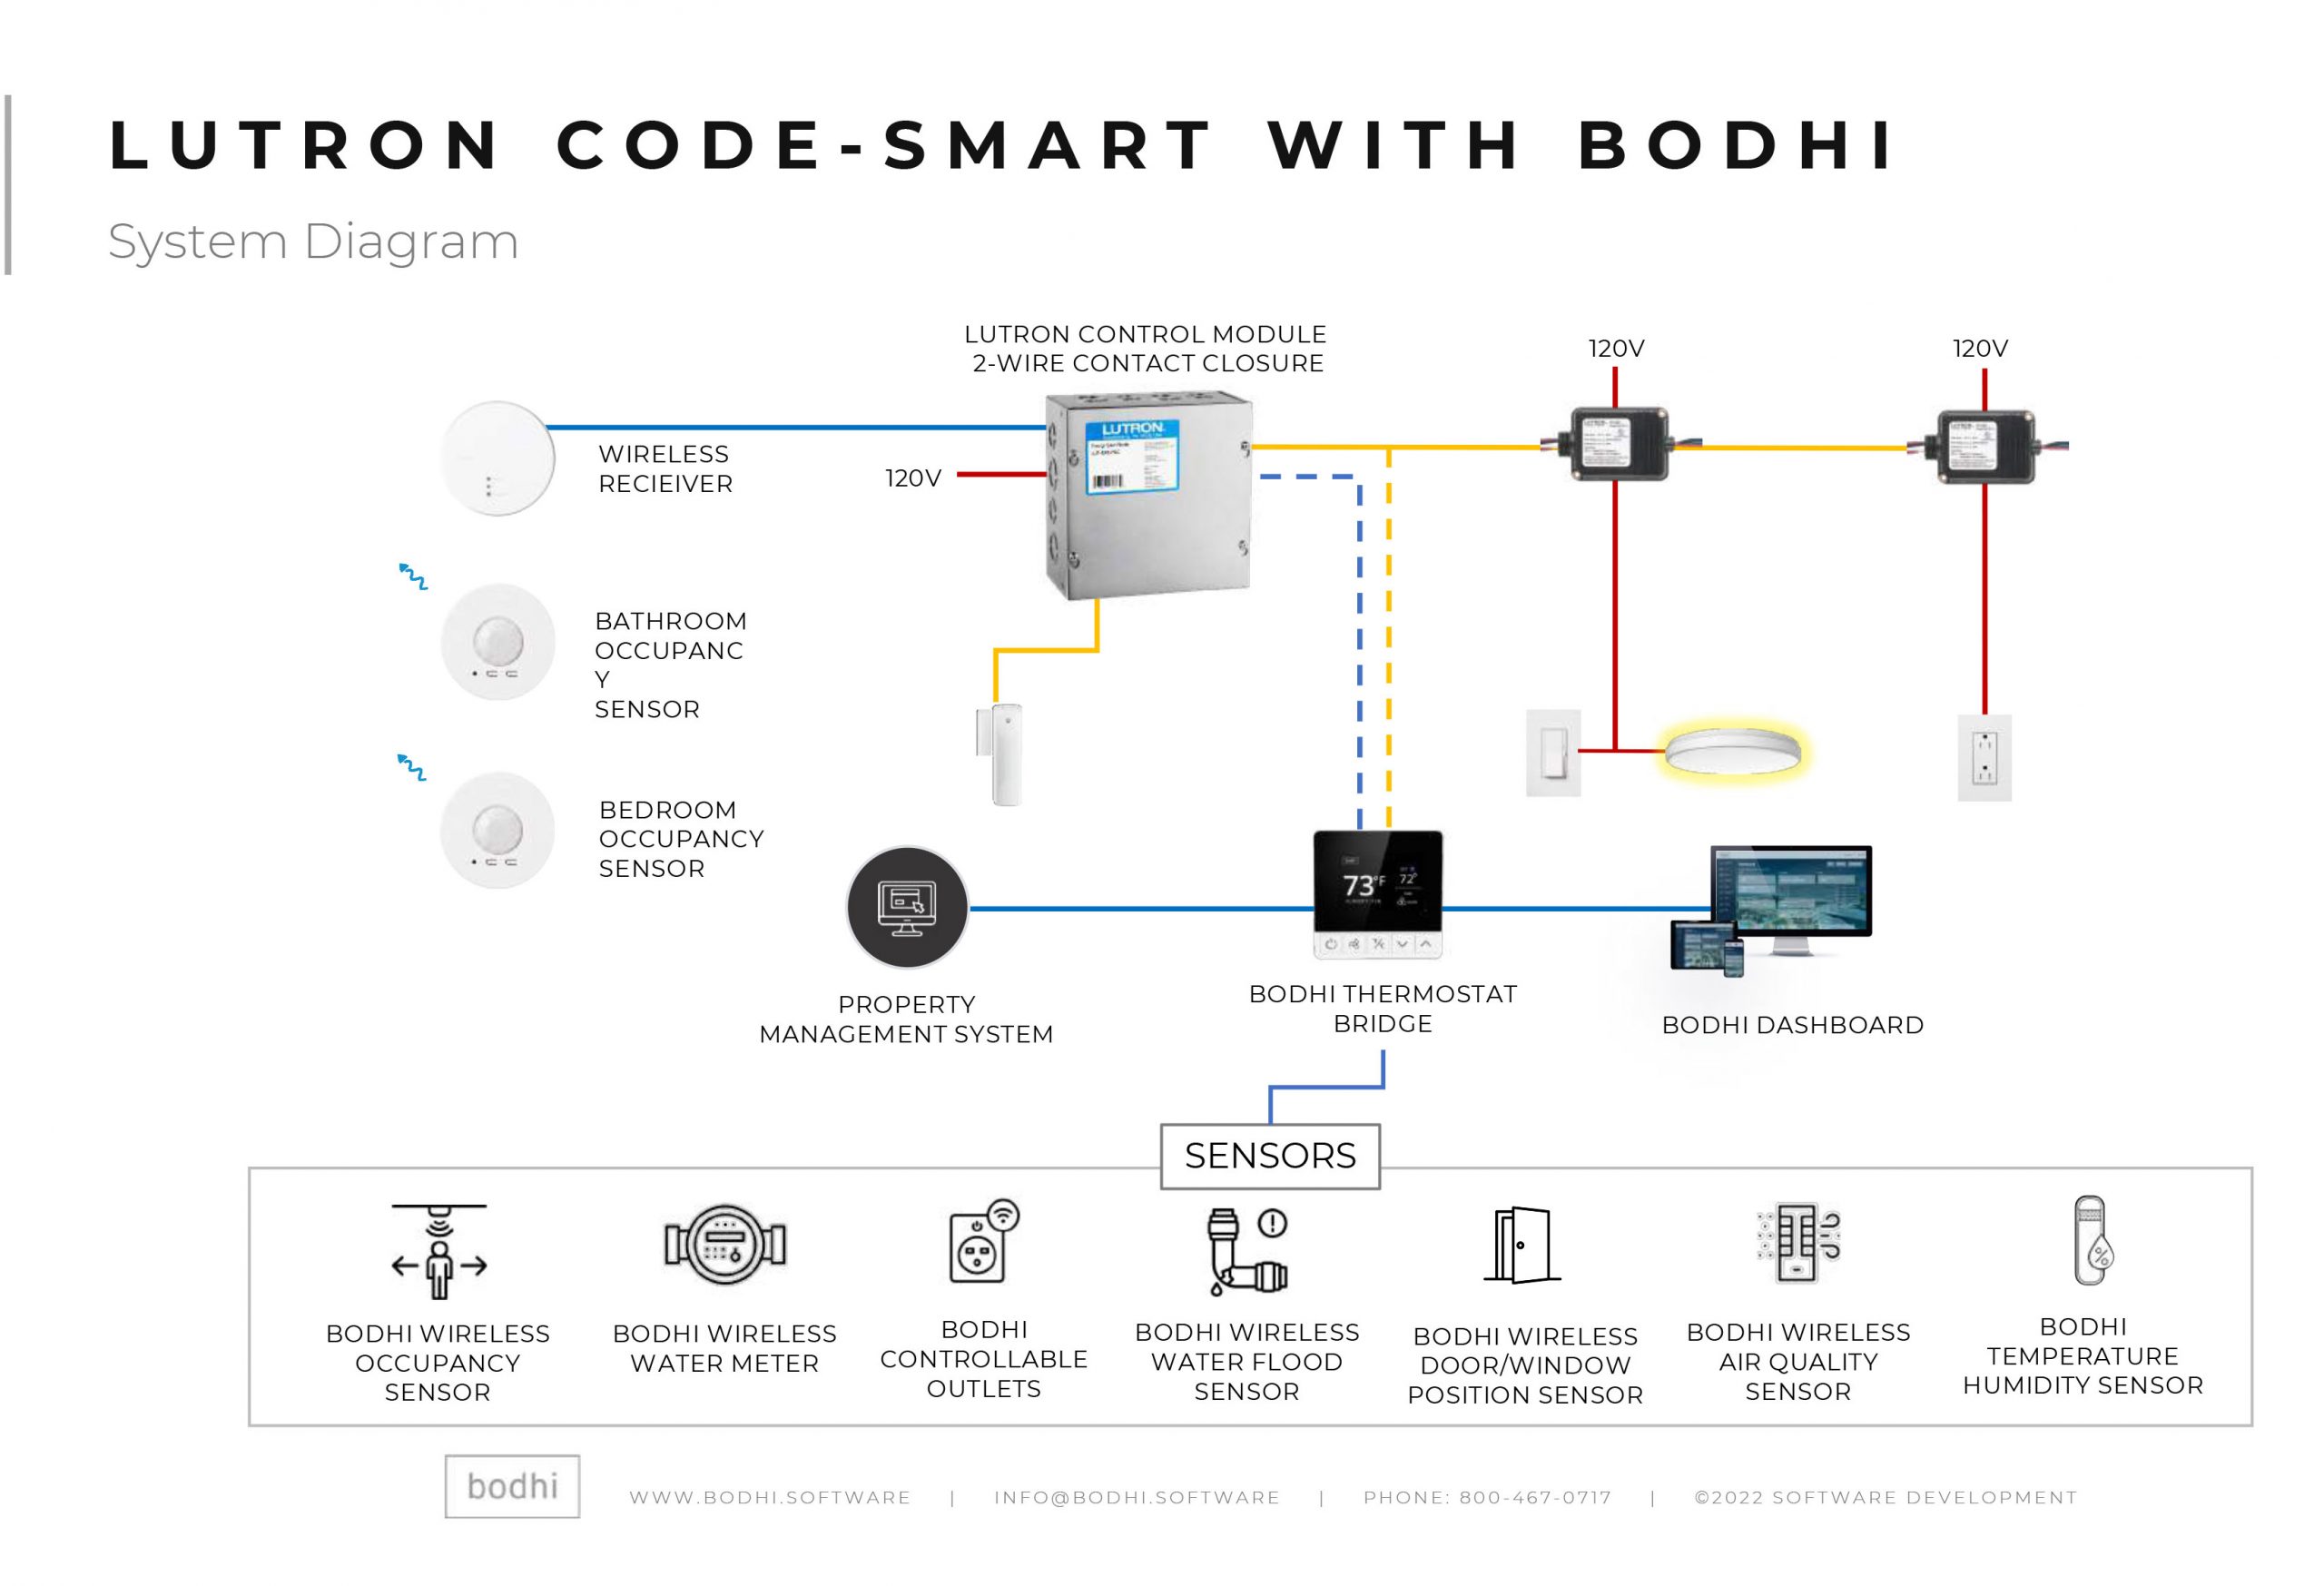 Add Bodhi to Lutron Code-Smart to maximize savings and guest satisfaction while meeting new requirements for hotel energy management. 